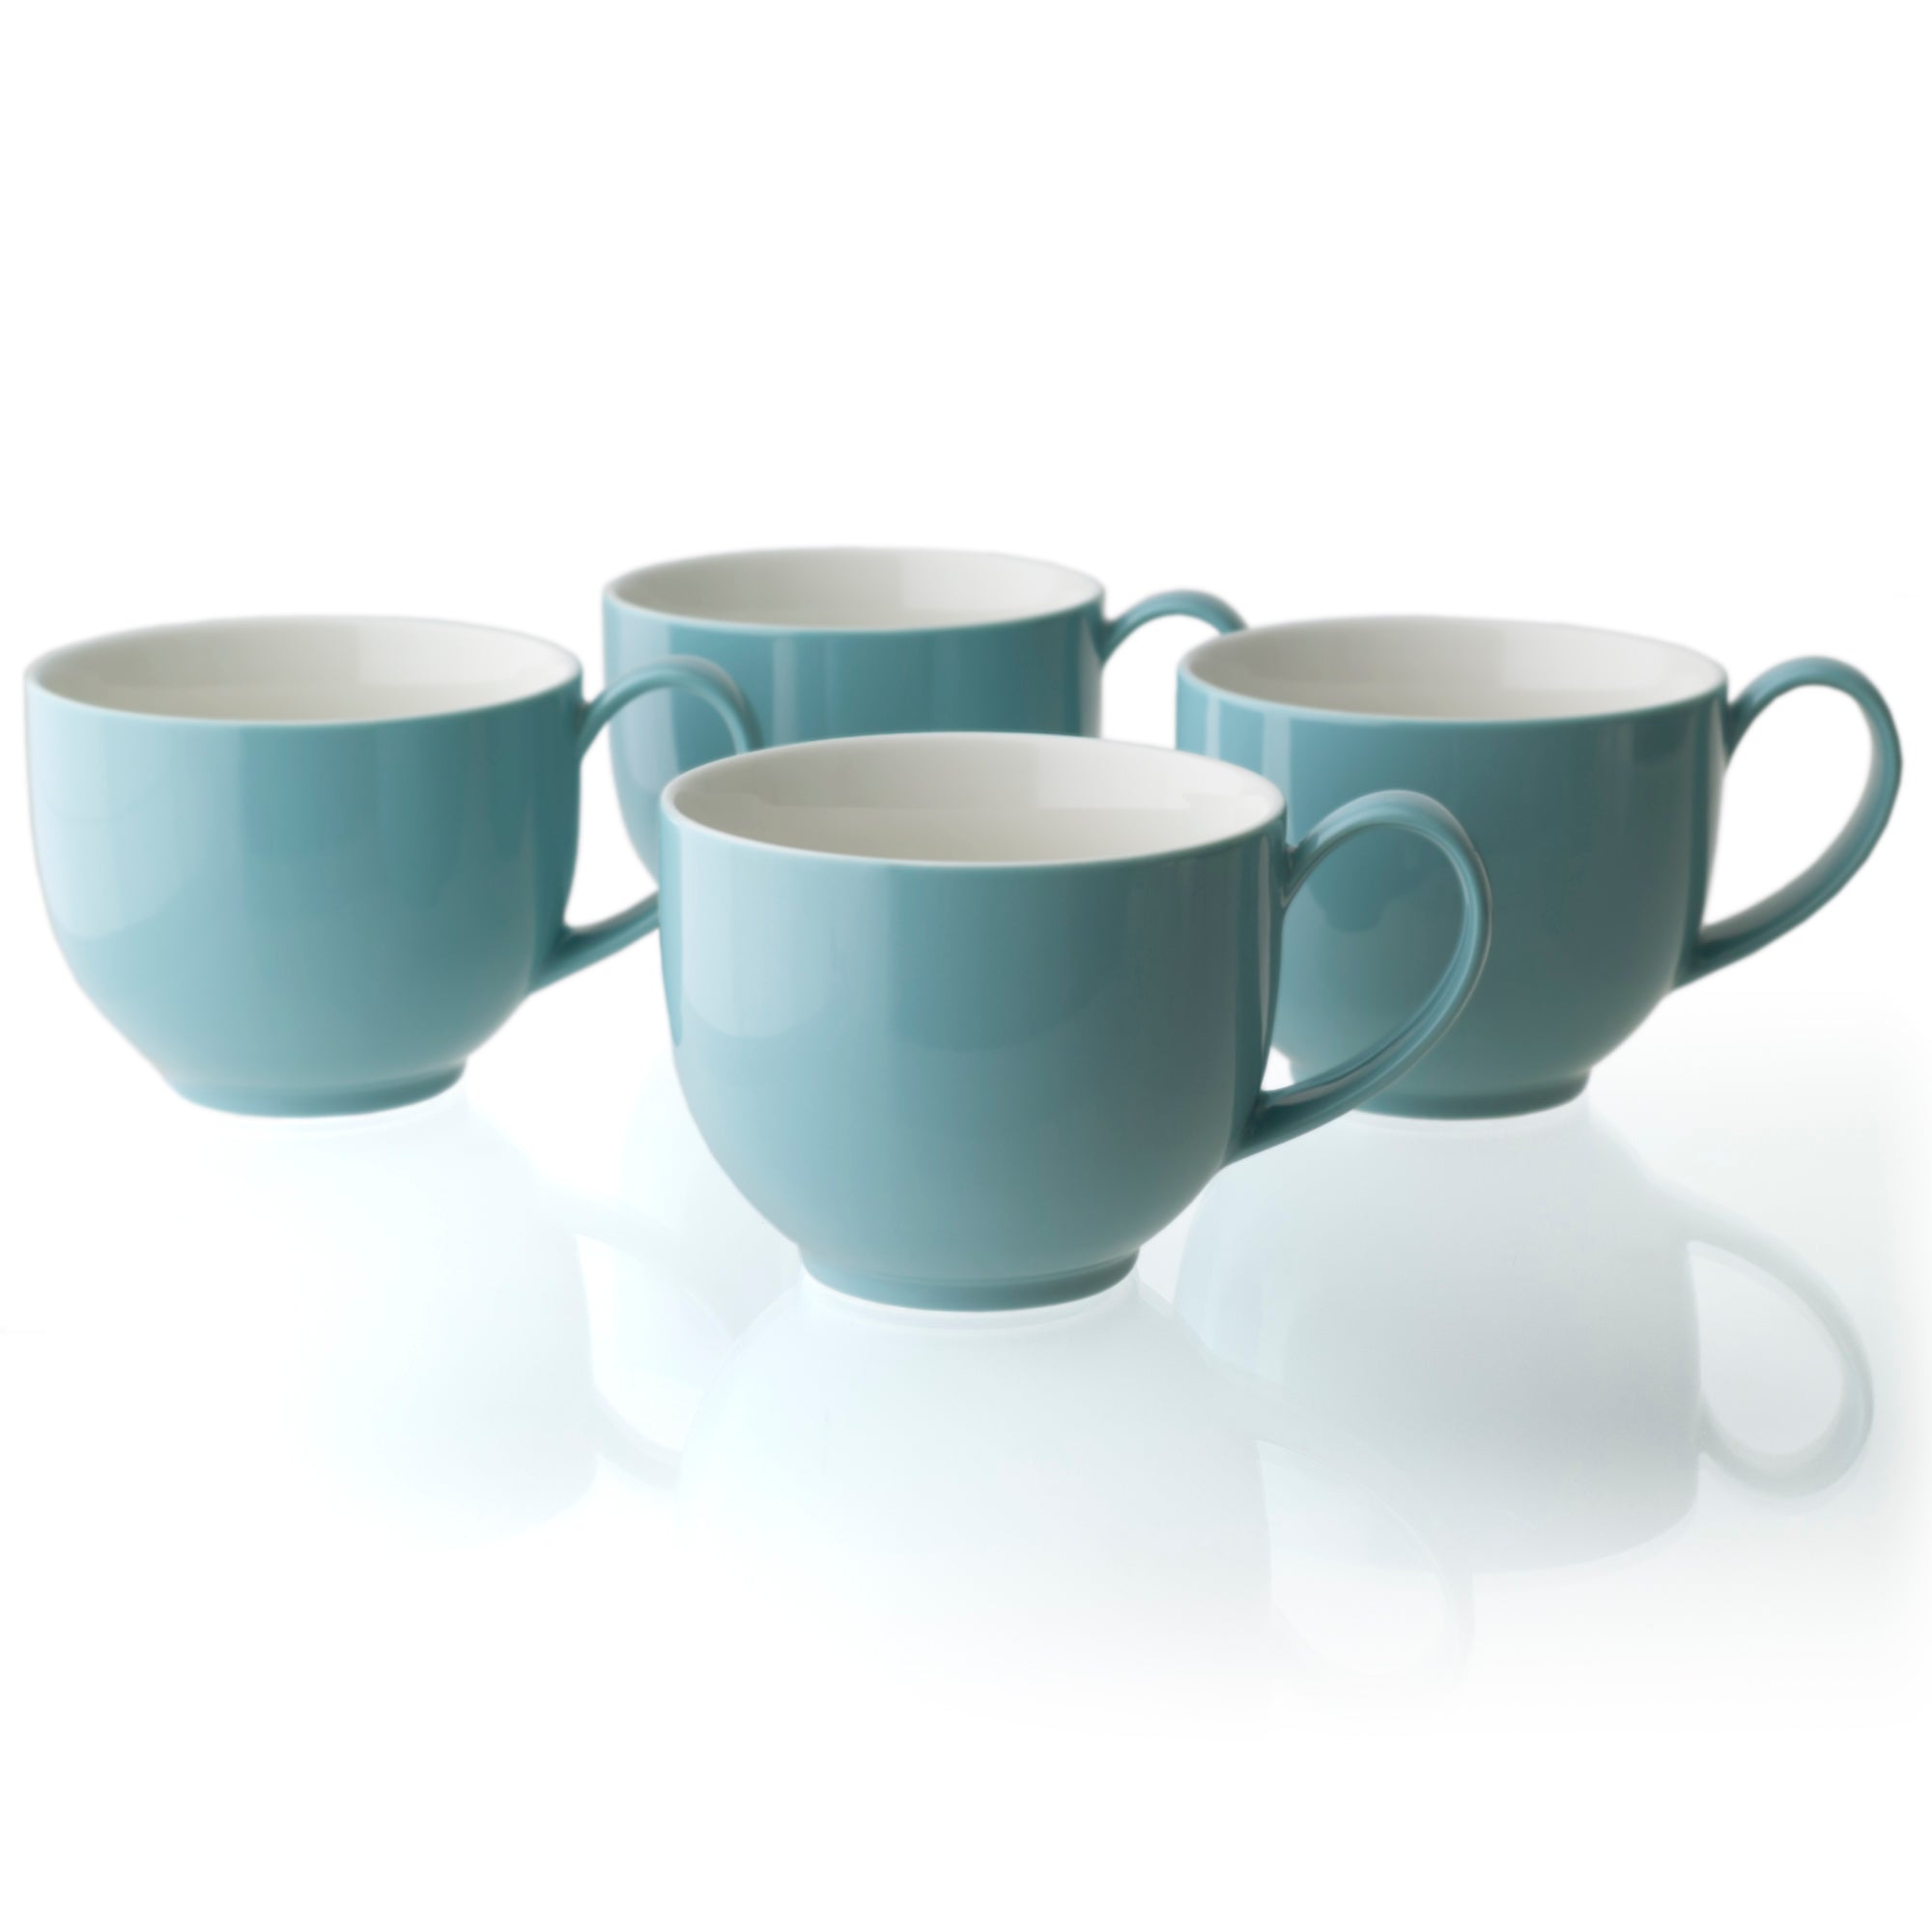 Q Tea Cup with Handle - 10 oz., 4 pc pack